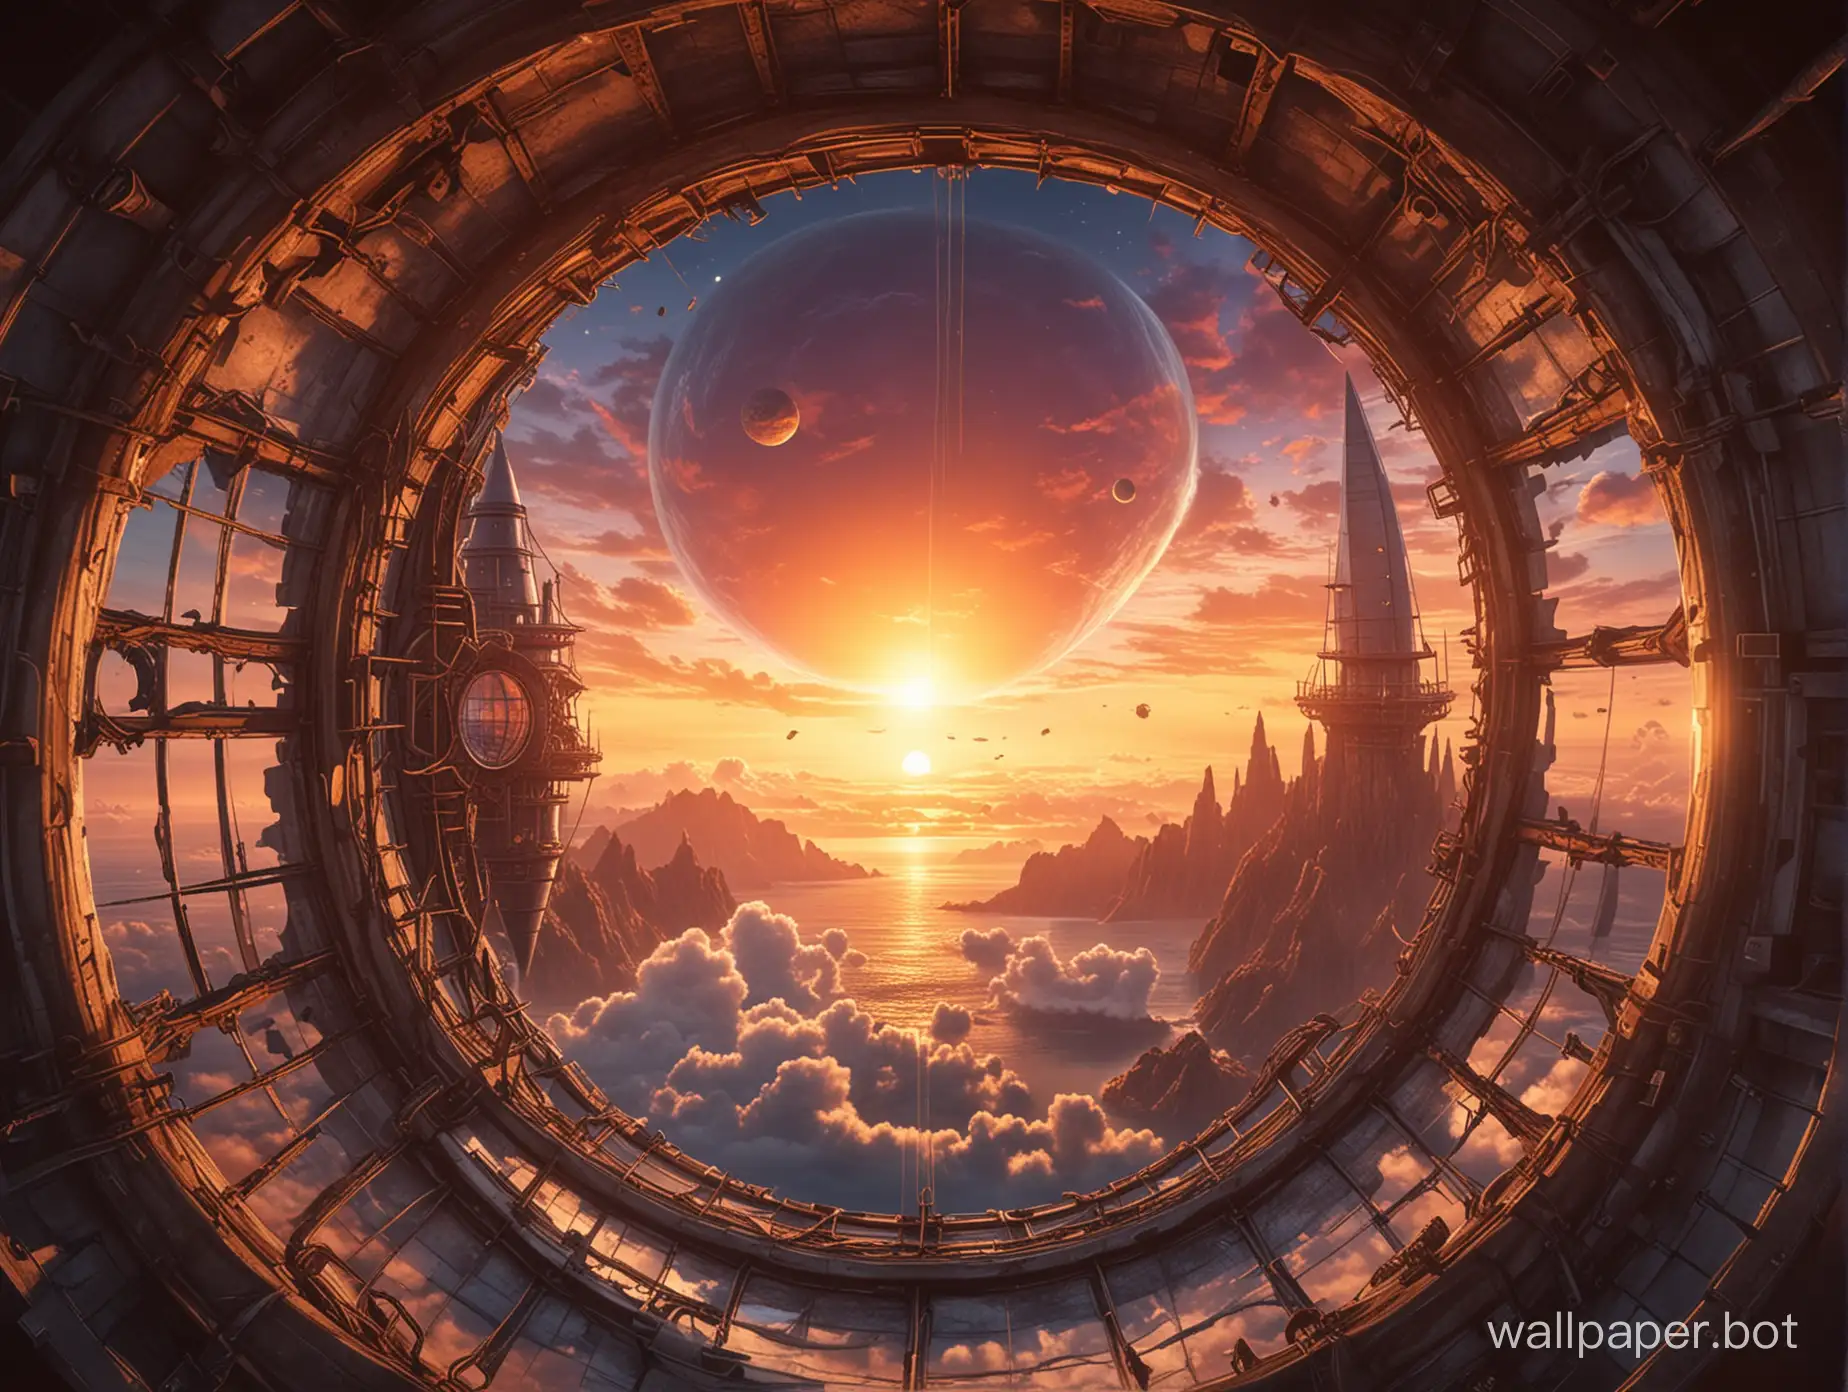 Fantasy-Tower-and-Airship-at-Sunset-SciFi-Anime-Steampunk-Art